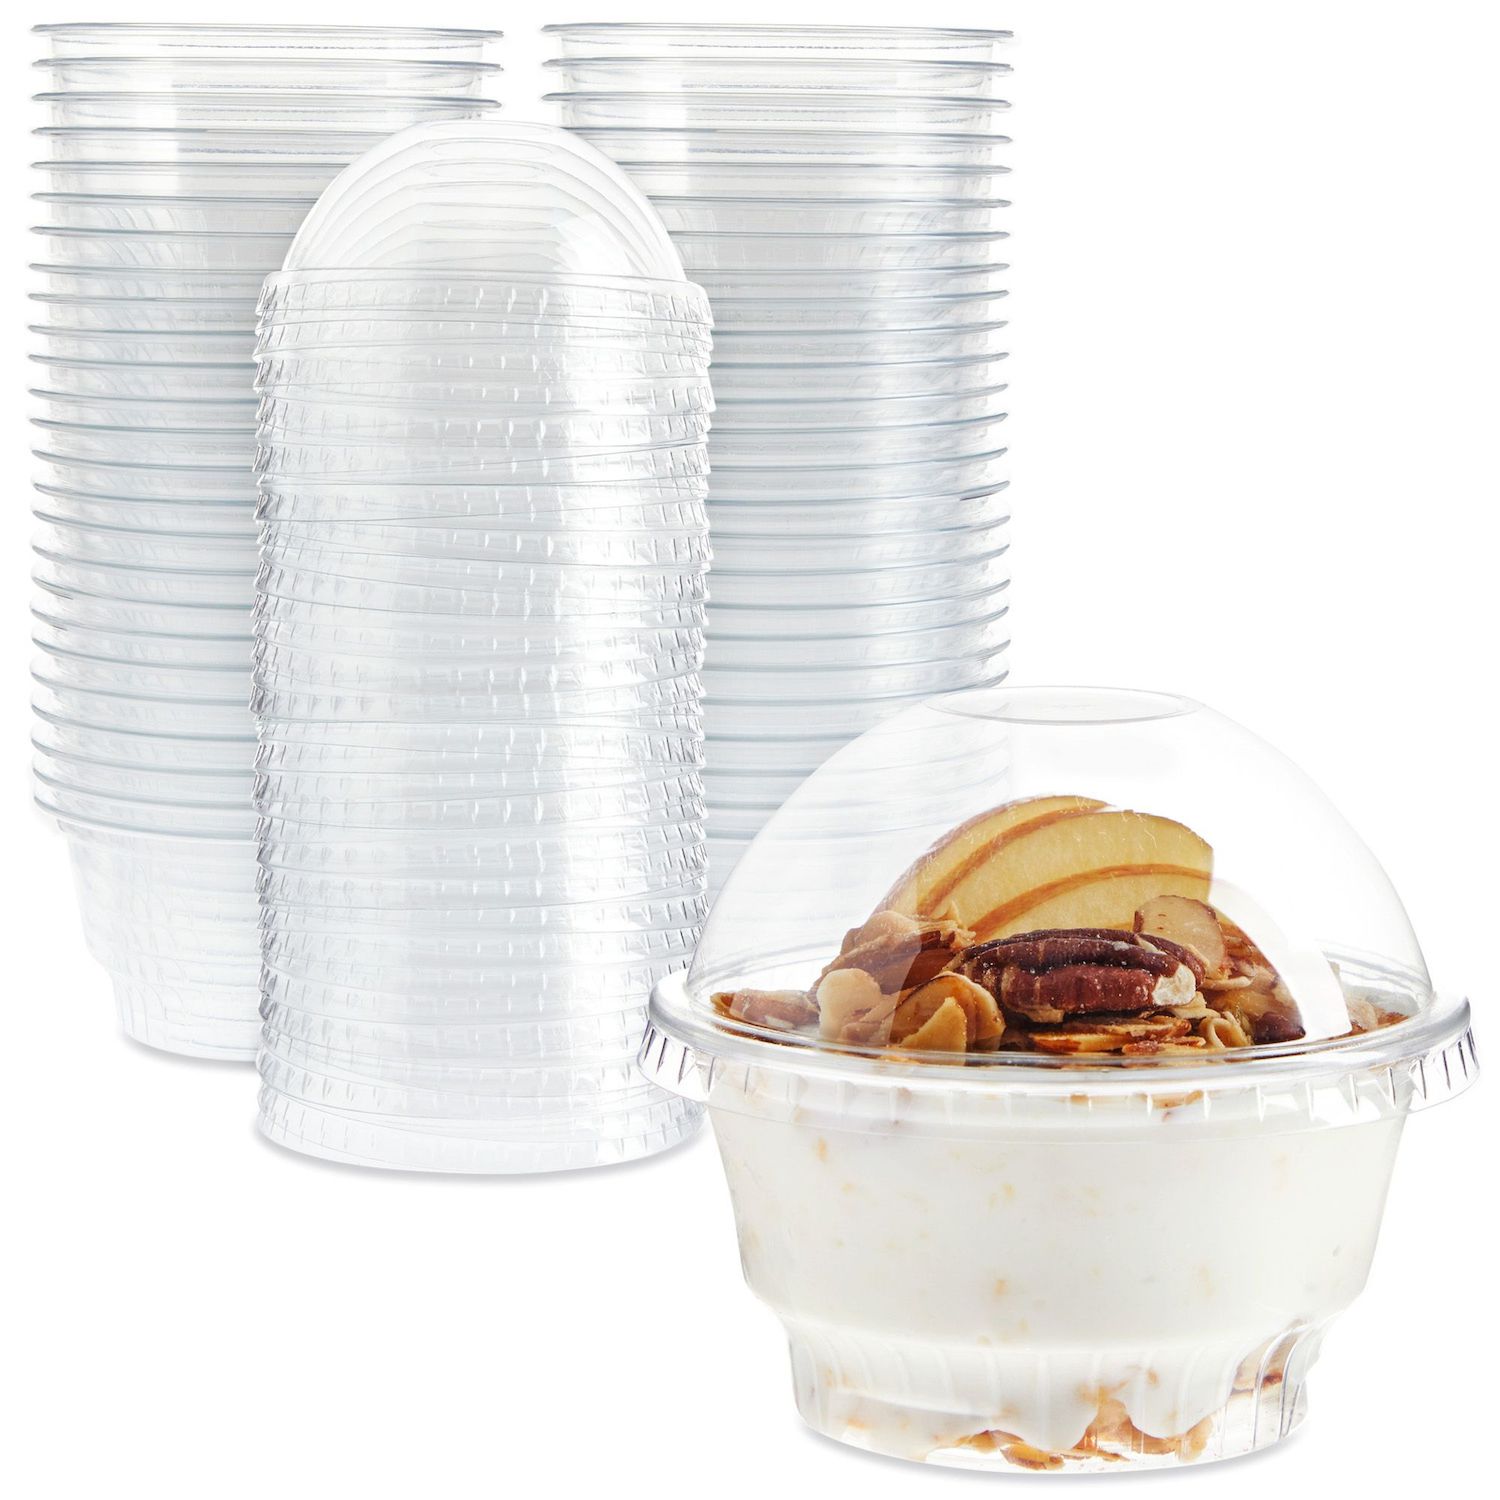 Zulay 2 Pack - 1 Quart Each Large Ice Cream Containers For